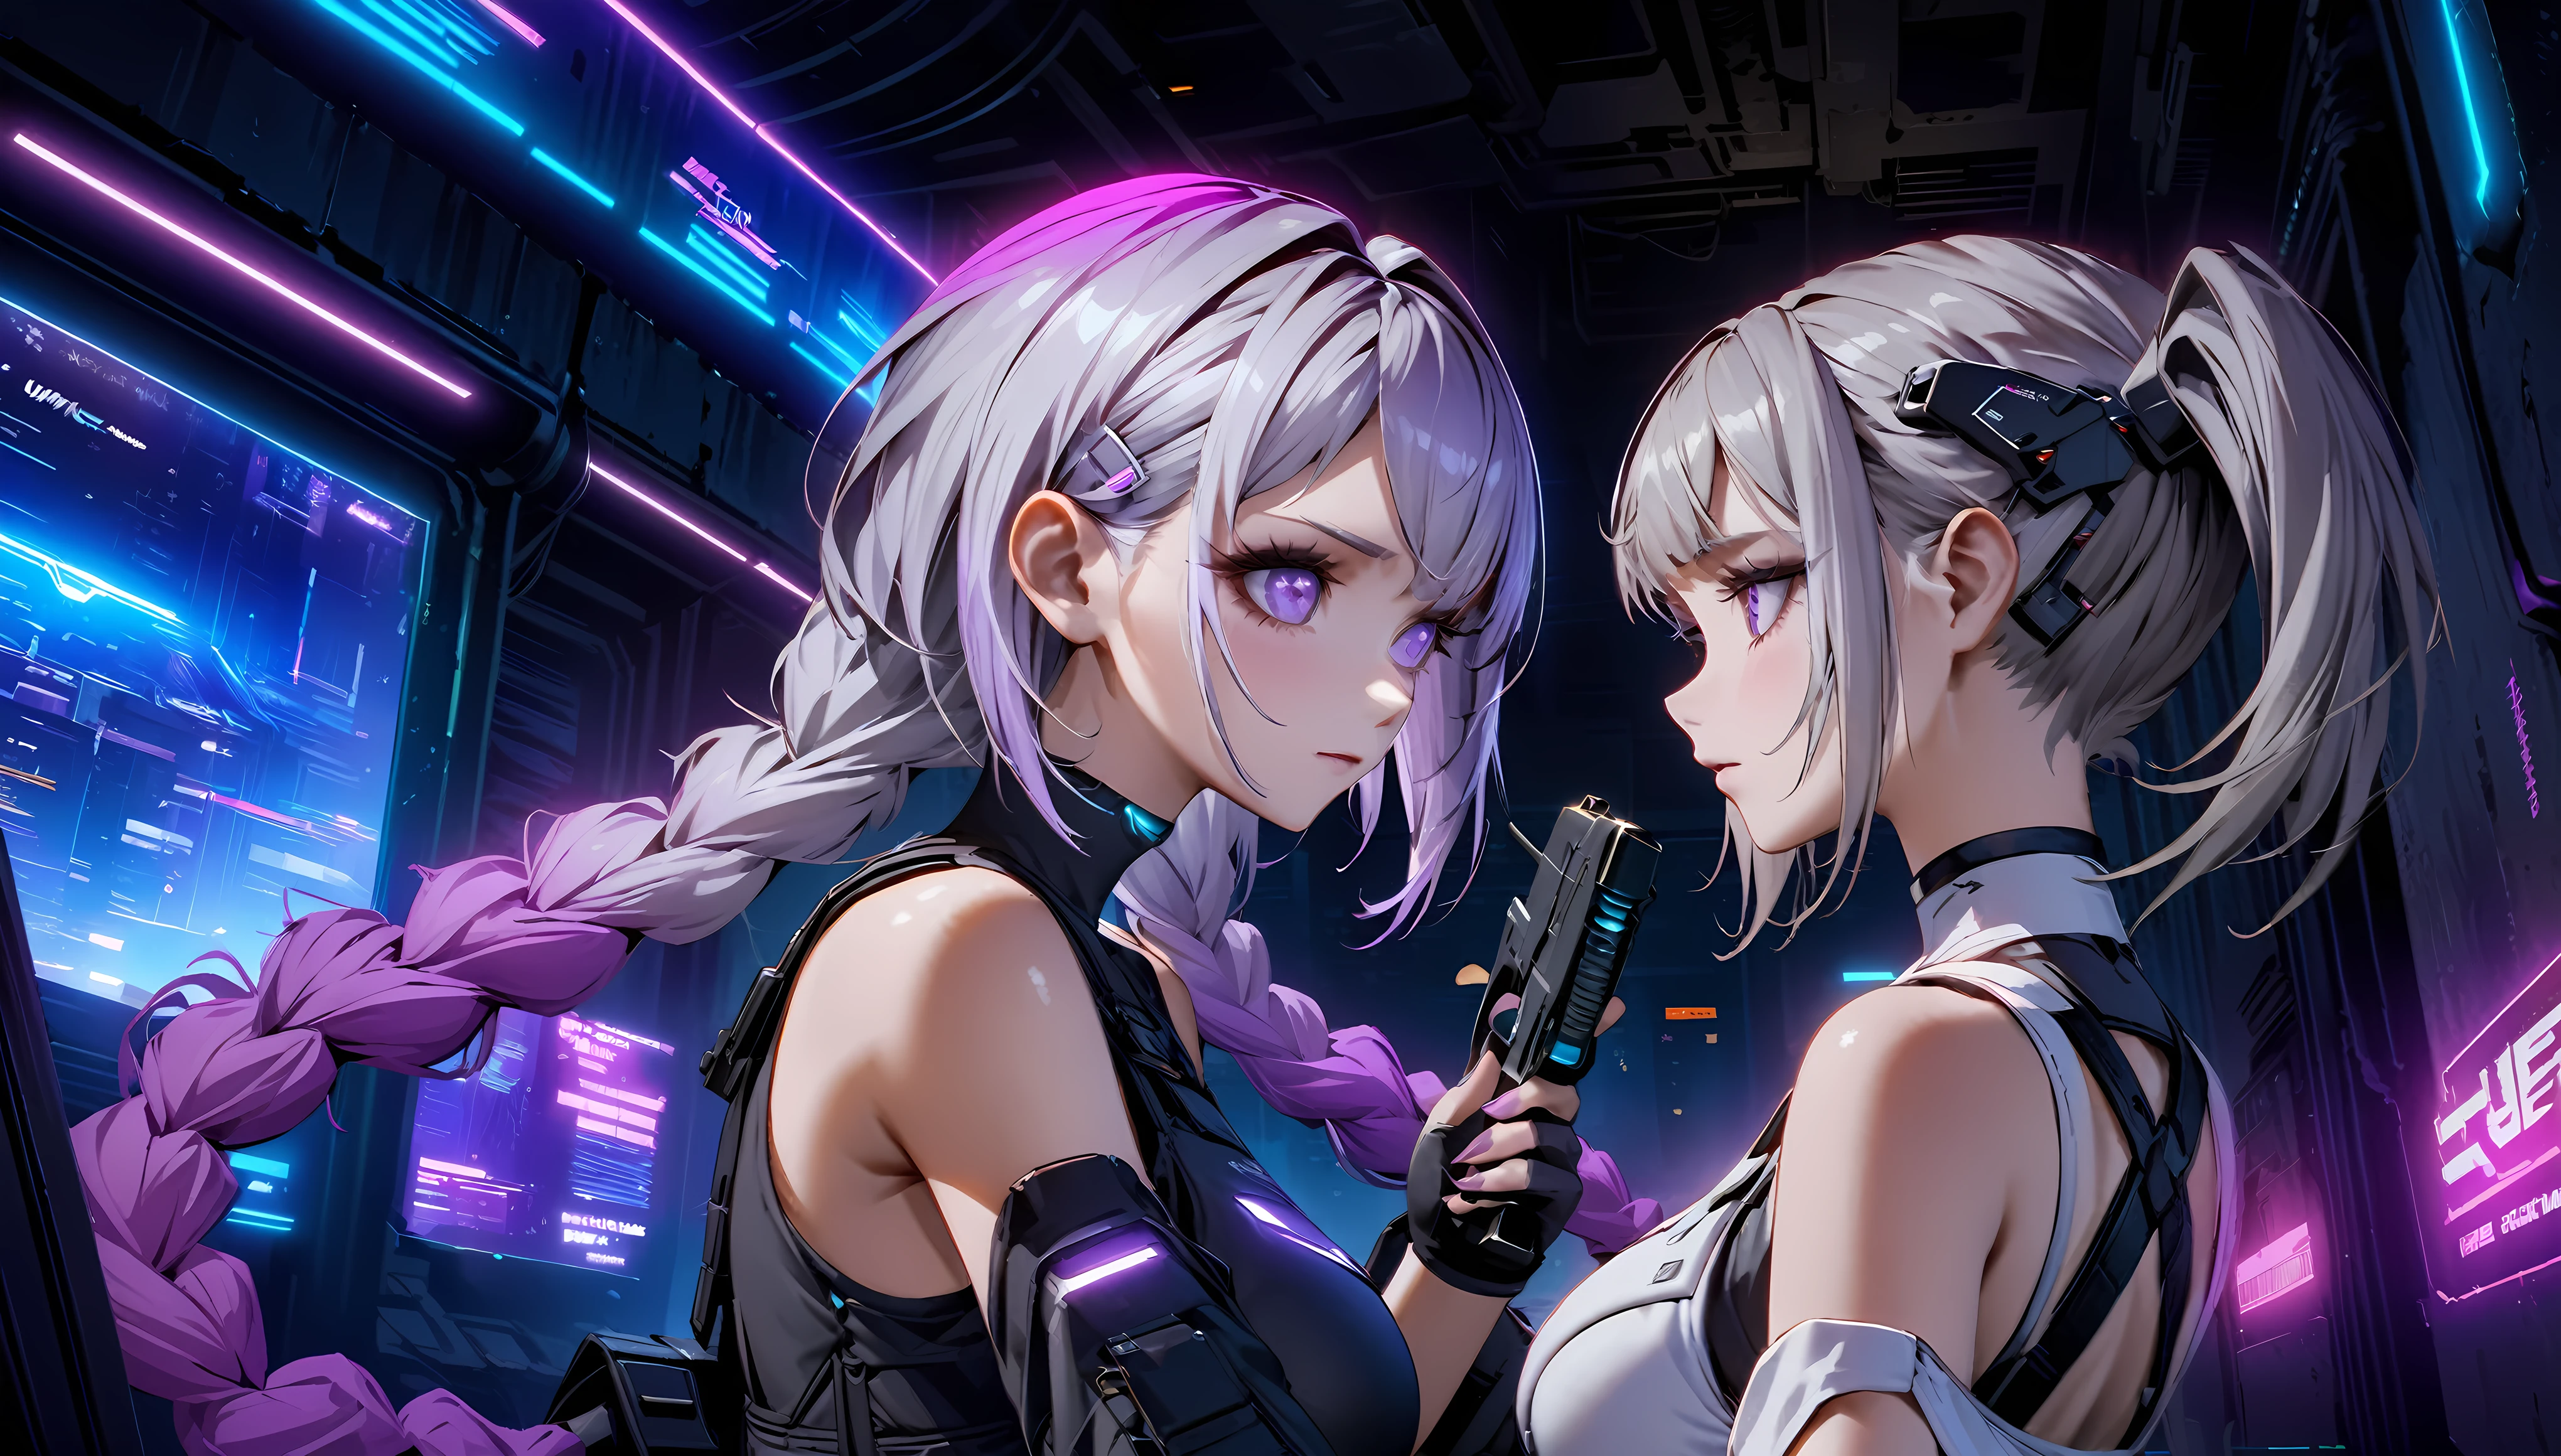 (((Official Art, Unity 8k wallpaper, super detailed, beautiful, beautiful, masterpiece, best quality))), 2 girls, look at each other., (One of the girls had Short silver hair, black top, Neon Art, cyber punk, arms, Pistol, Rocket Launcher, missile), (The other girl had long purple and white gradation double ponytail twists, bare shoulders, white corset,)，(purple and white gradation color hair:1.1), background is a cyberpunk city